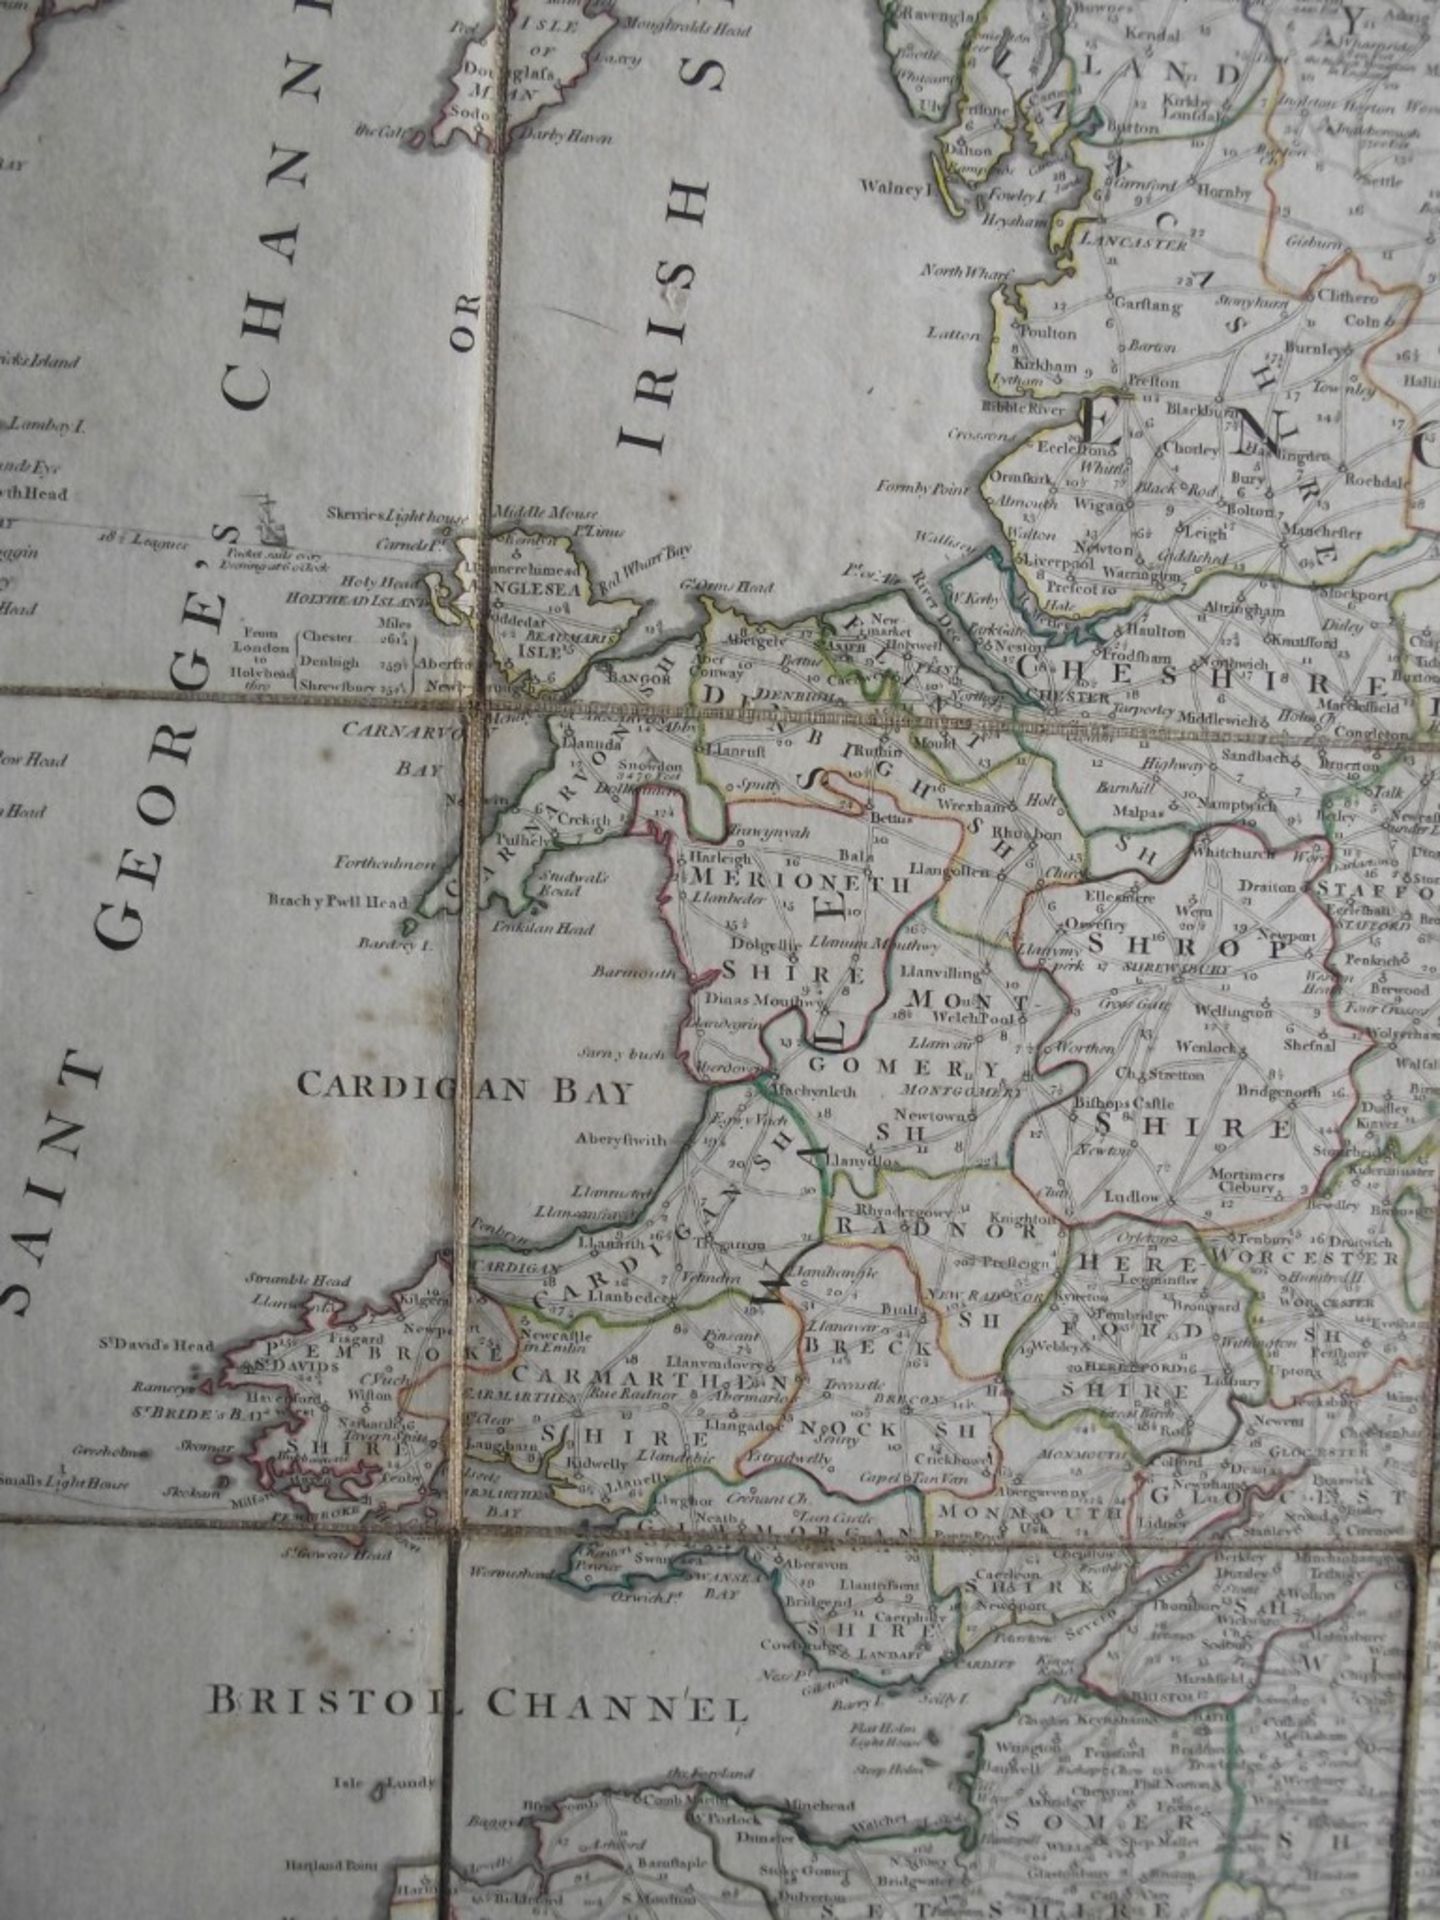 A New Map of the Roads of Ireland and Scotland - by Laurie & Whittle - 12th May 1794 - Original c... - Image 25 of 31